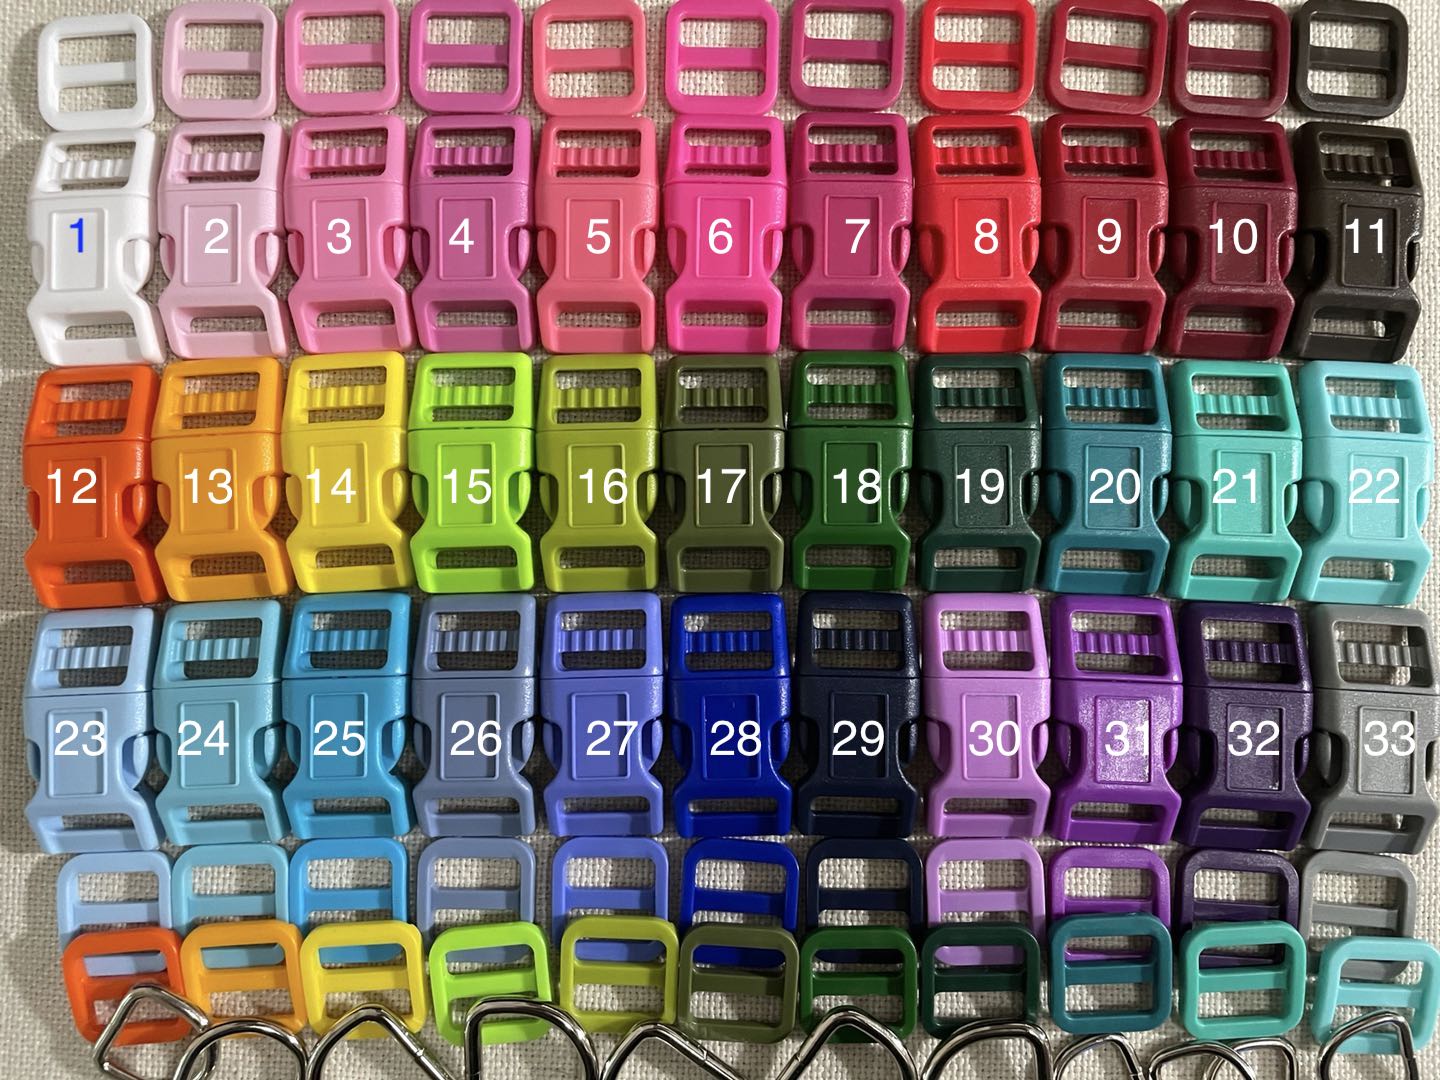 Dog Collar Hardware Kits (Buckle+Triglides+Dee)  33 Colors 3 Sizes Mix color